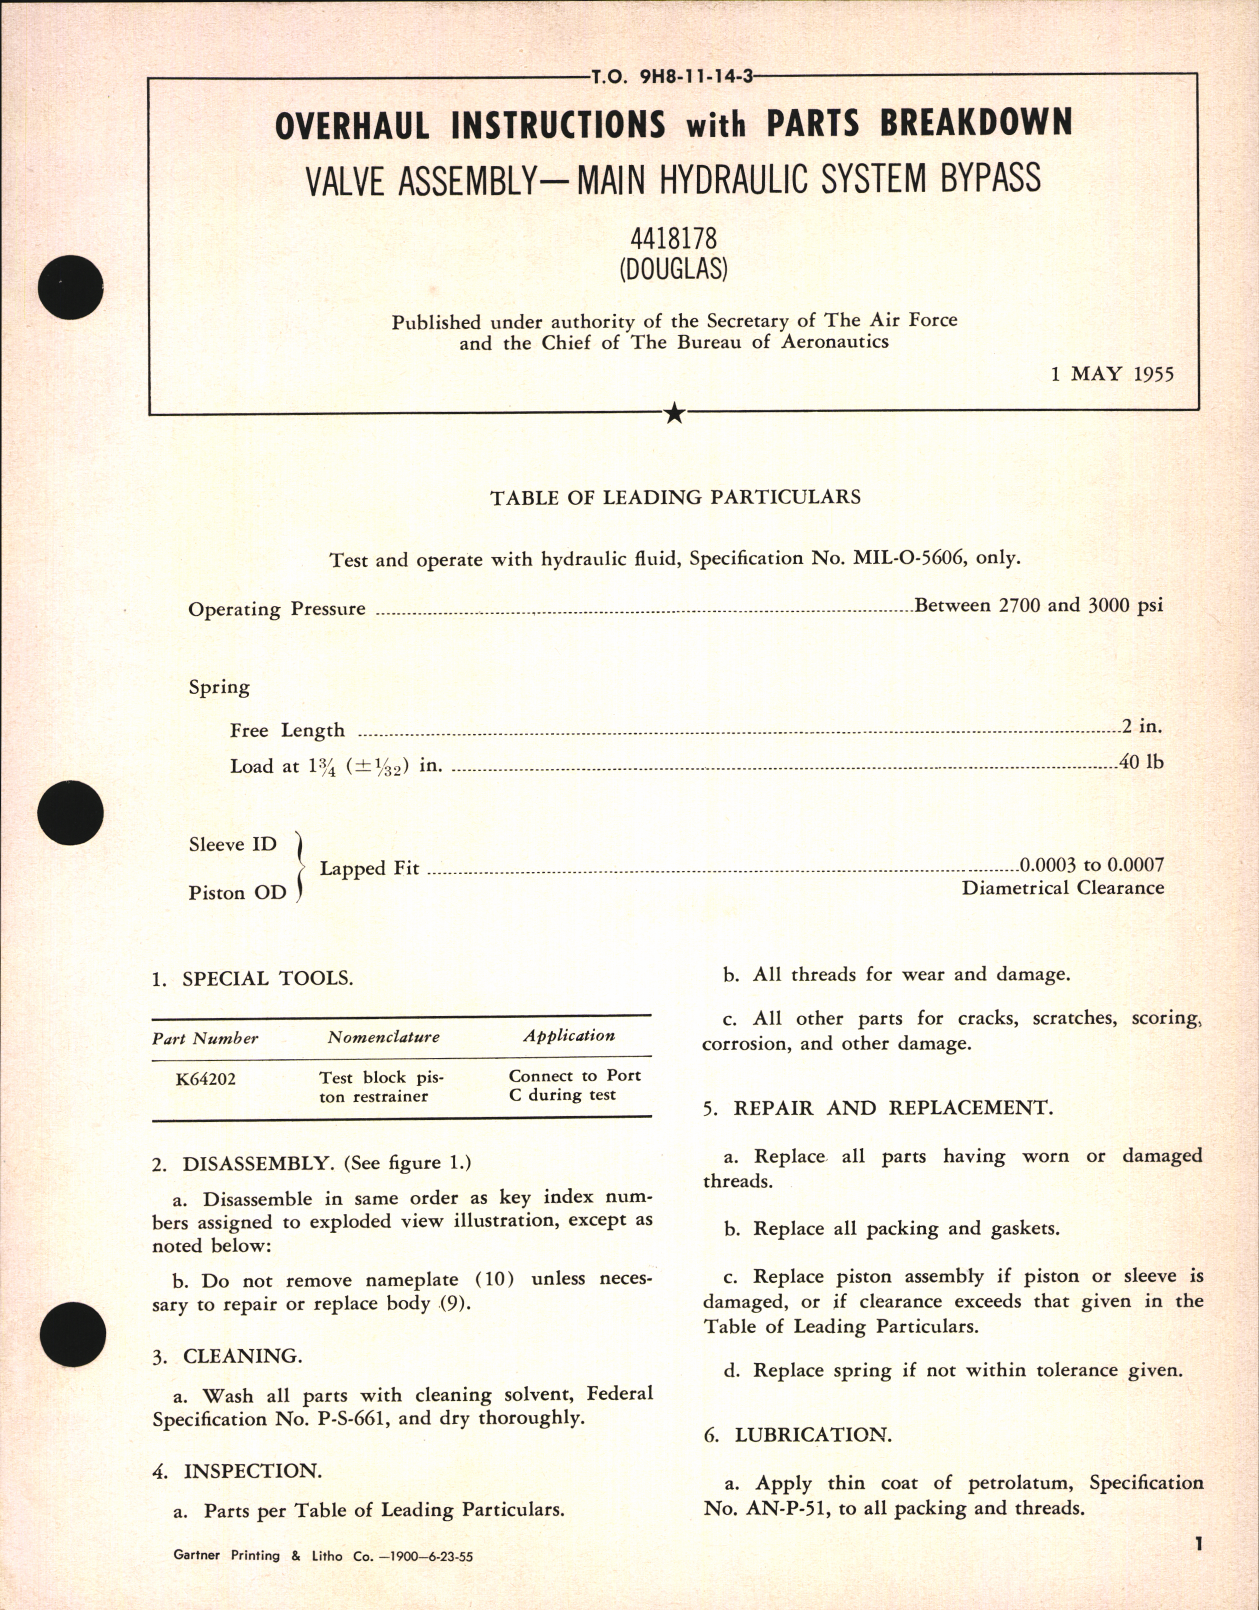 Sample page 1 from AirCorps Library document: Overhaul Instructions with Parts Breakdown for Valve Assembly Main hydraulic System Bypass 4418178